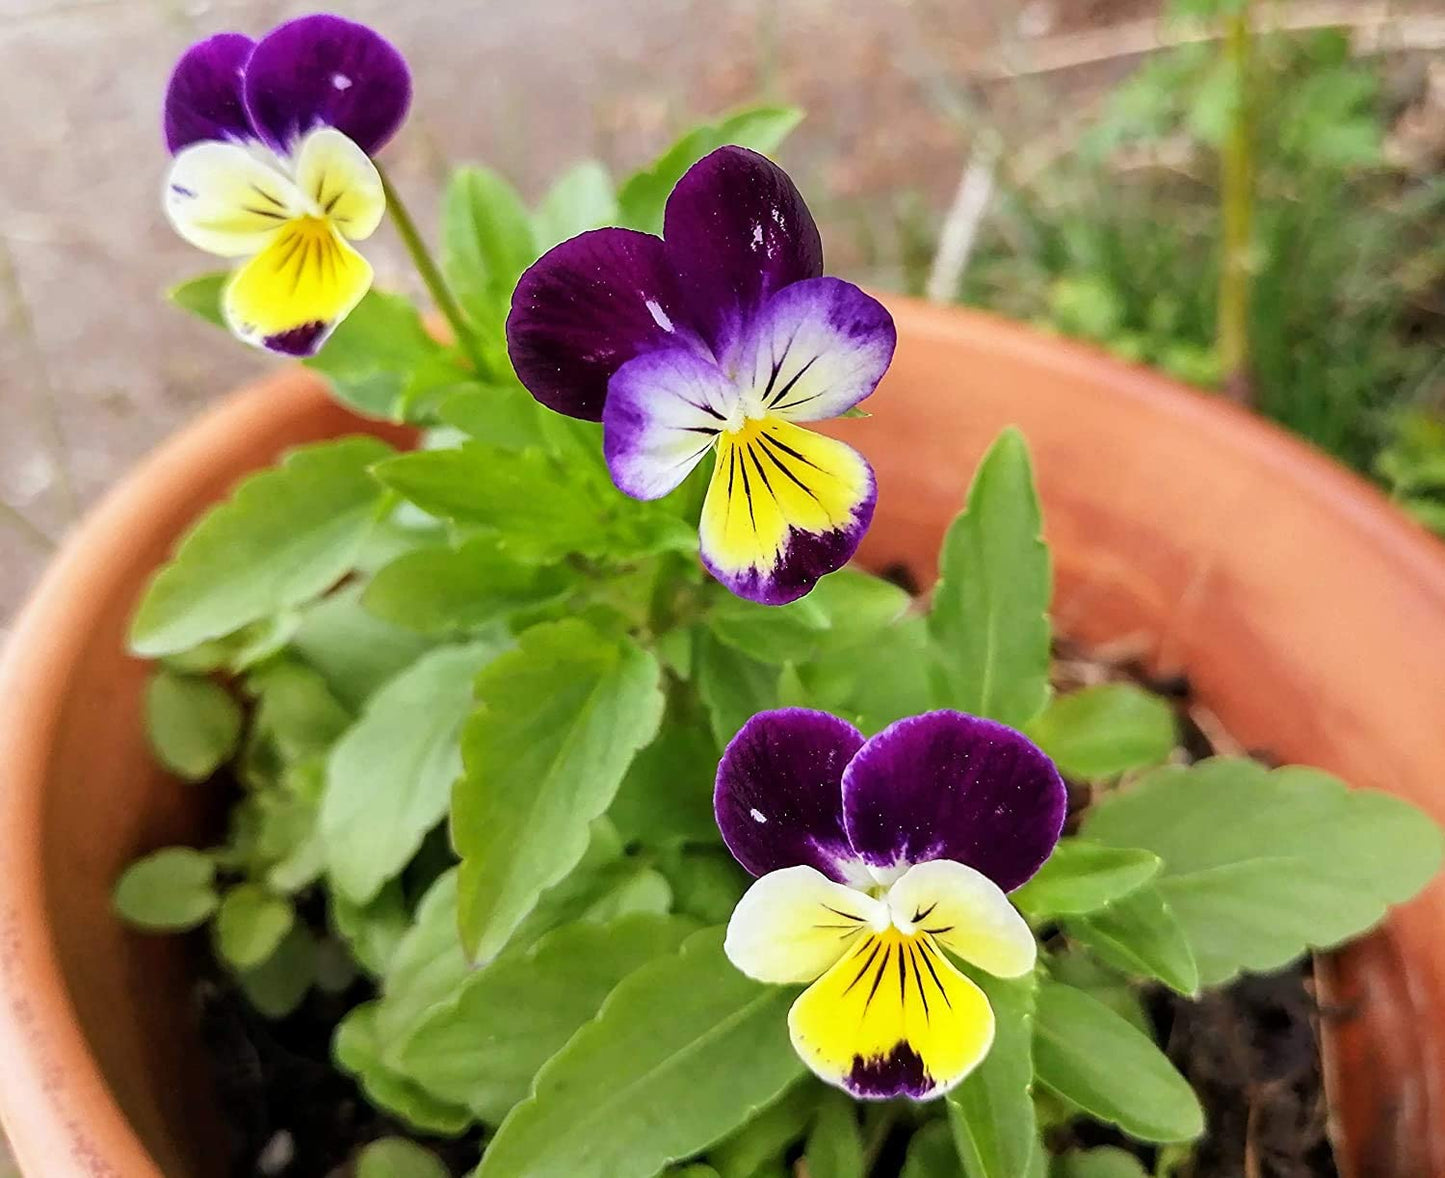 Johnny-Jump-Up 100 Seeds - Viola Tricolor Non-GMO Heartsease Pansy, Wild Pansy, Edible Flowers